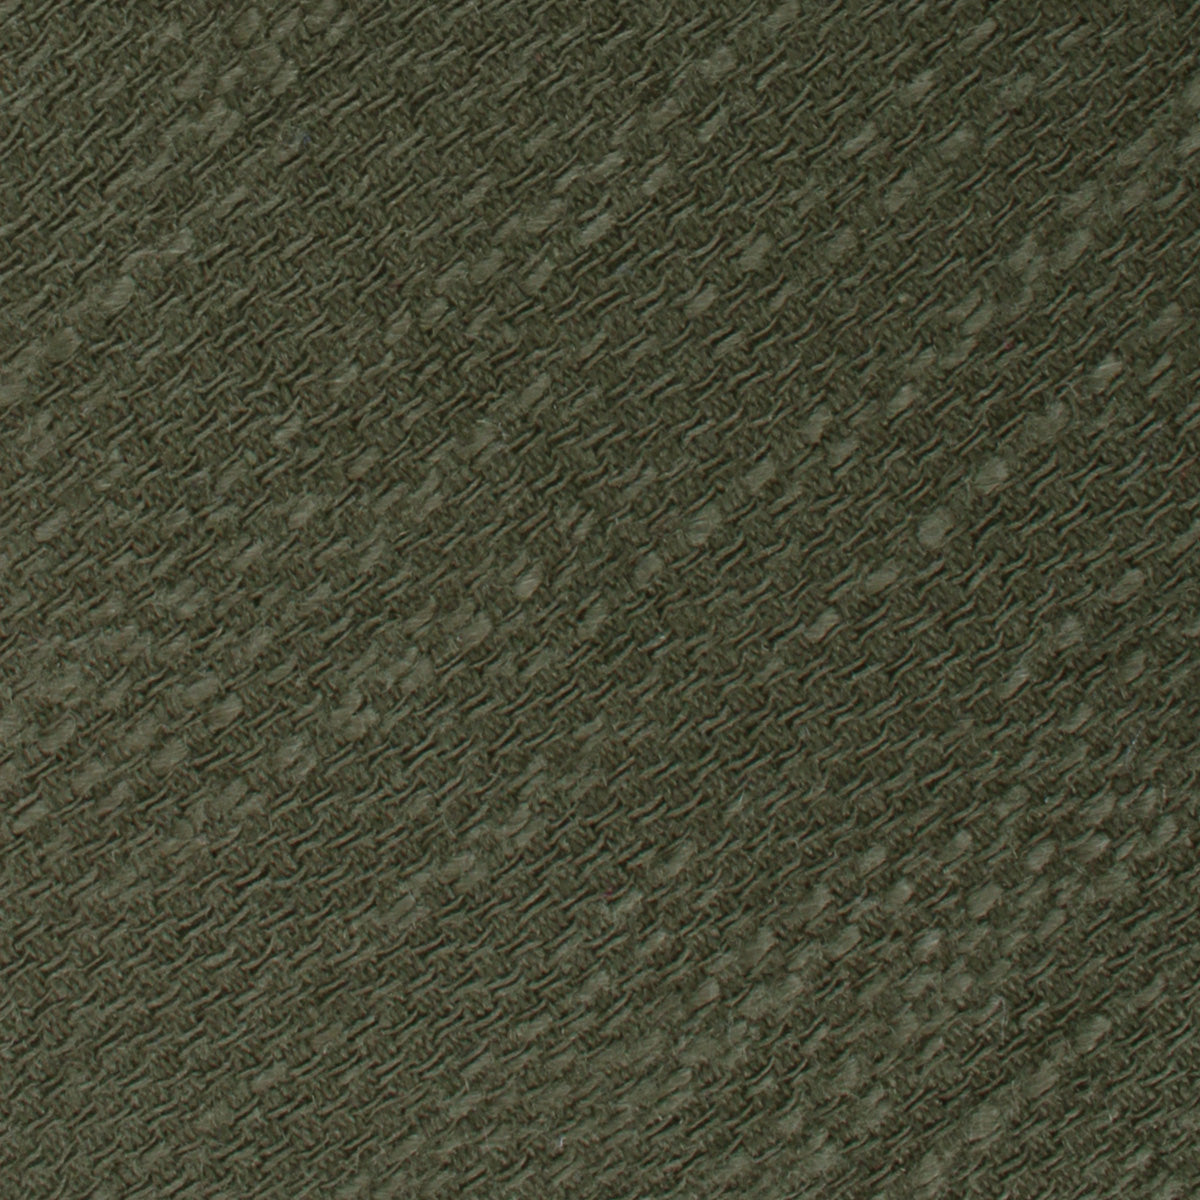 Olive Green Coarse Linen Fabric Swatch